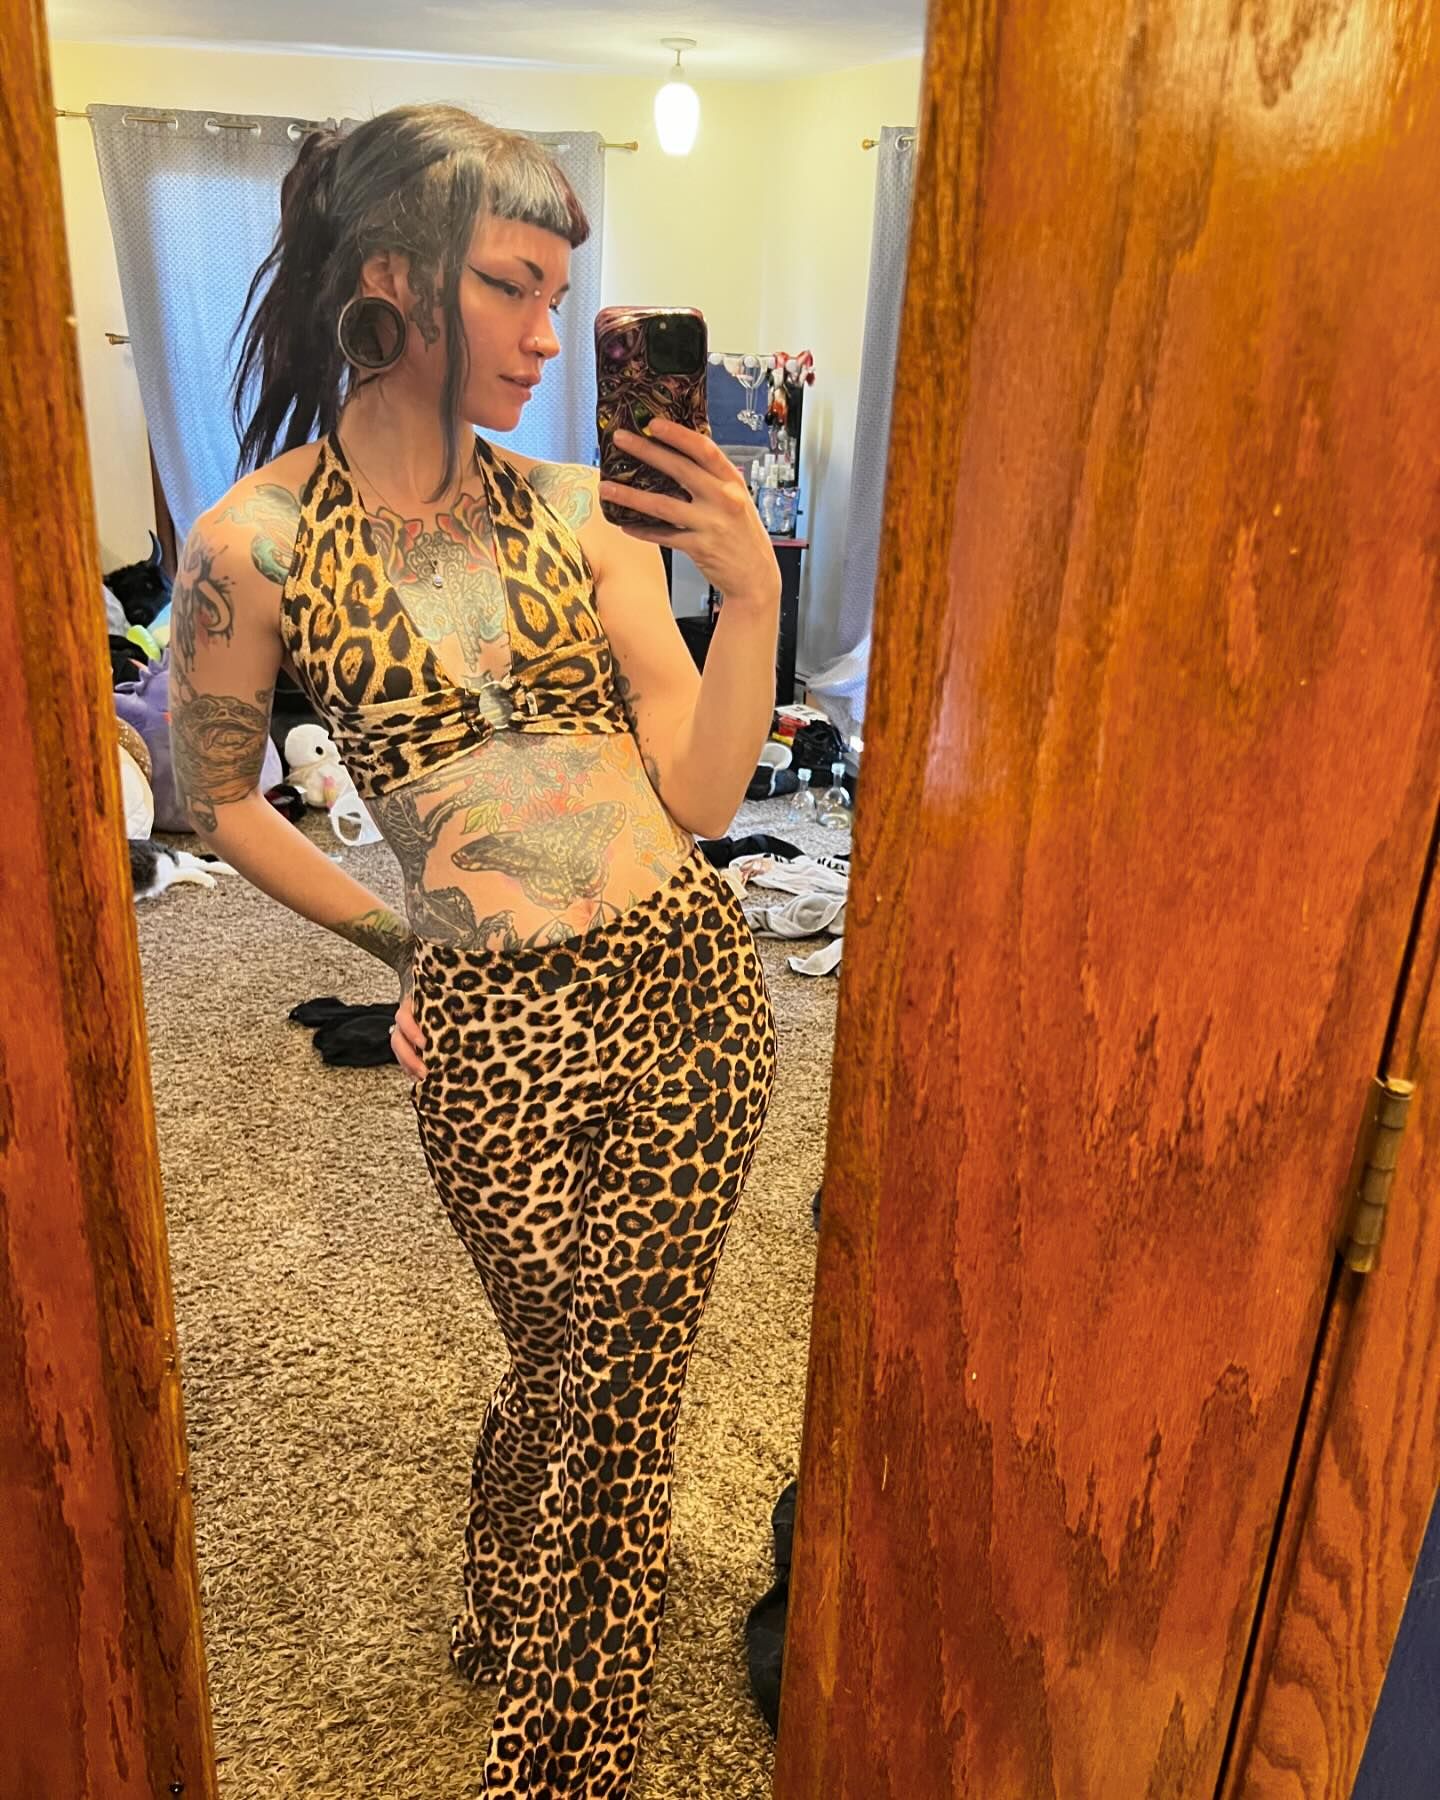 which is your favorite 🦂
all outfits are thrifted 
🦂
🦂
🦂
#thrifted #thriftedfashion #cheetah #blackleather #birthofvenus #ootd #pickyourfavorite #fyp #fypシ #stretchedears #stretchedseptum #tattoos #makeup #fashion